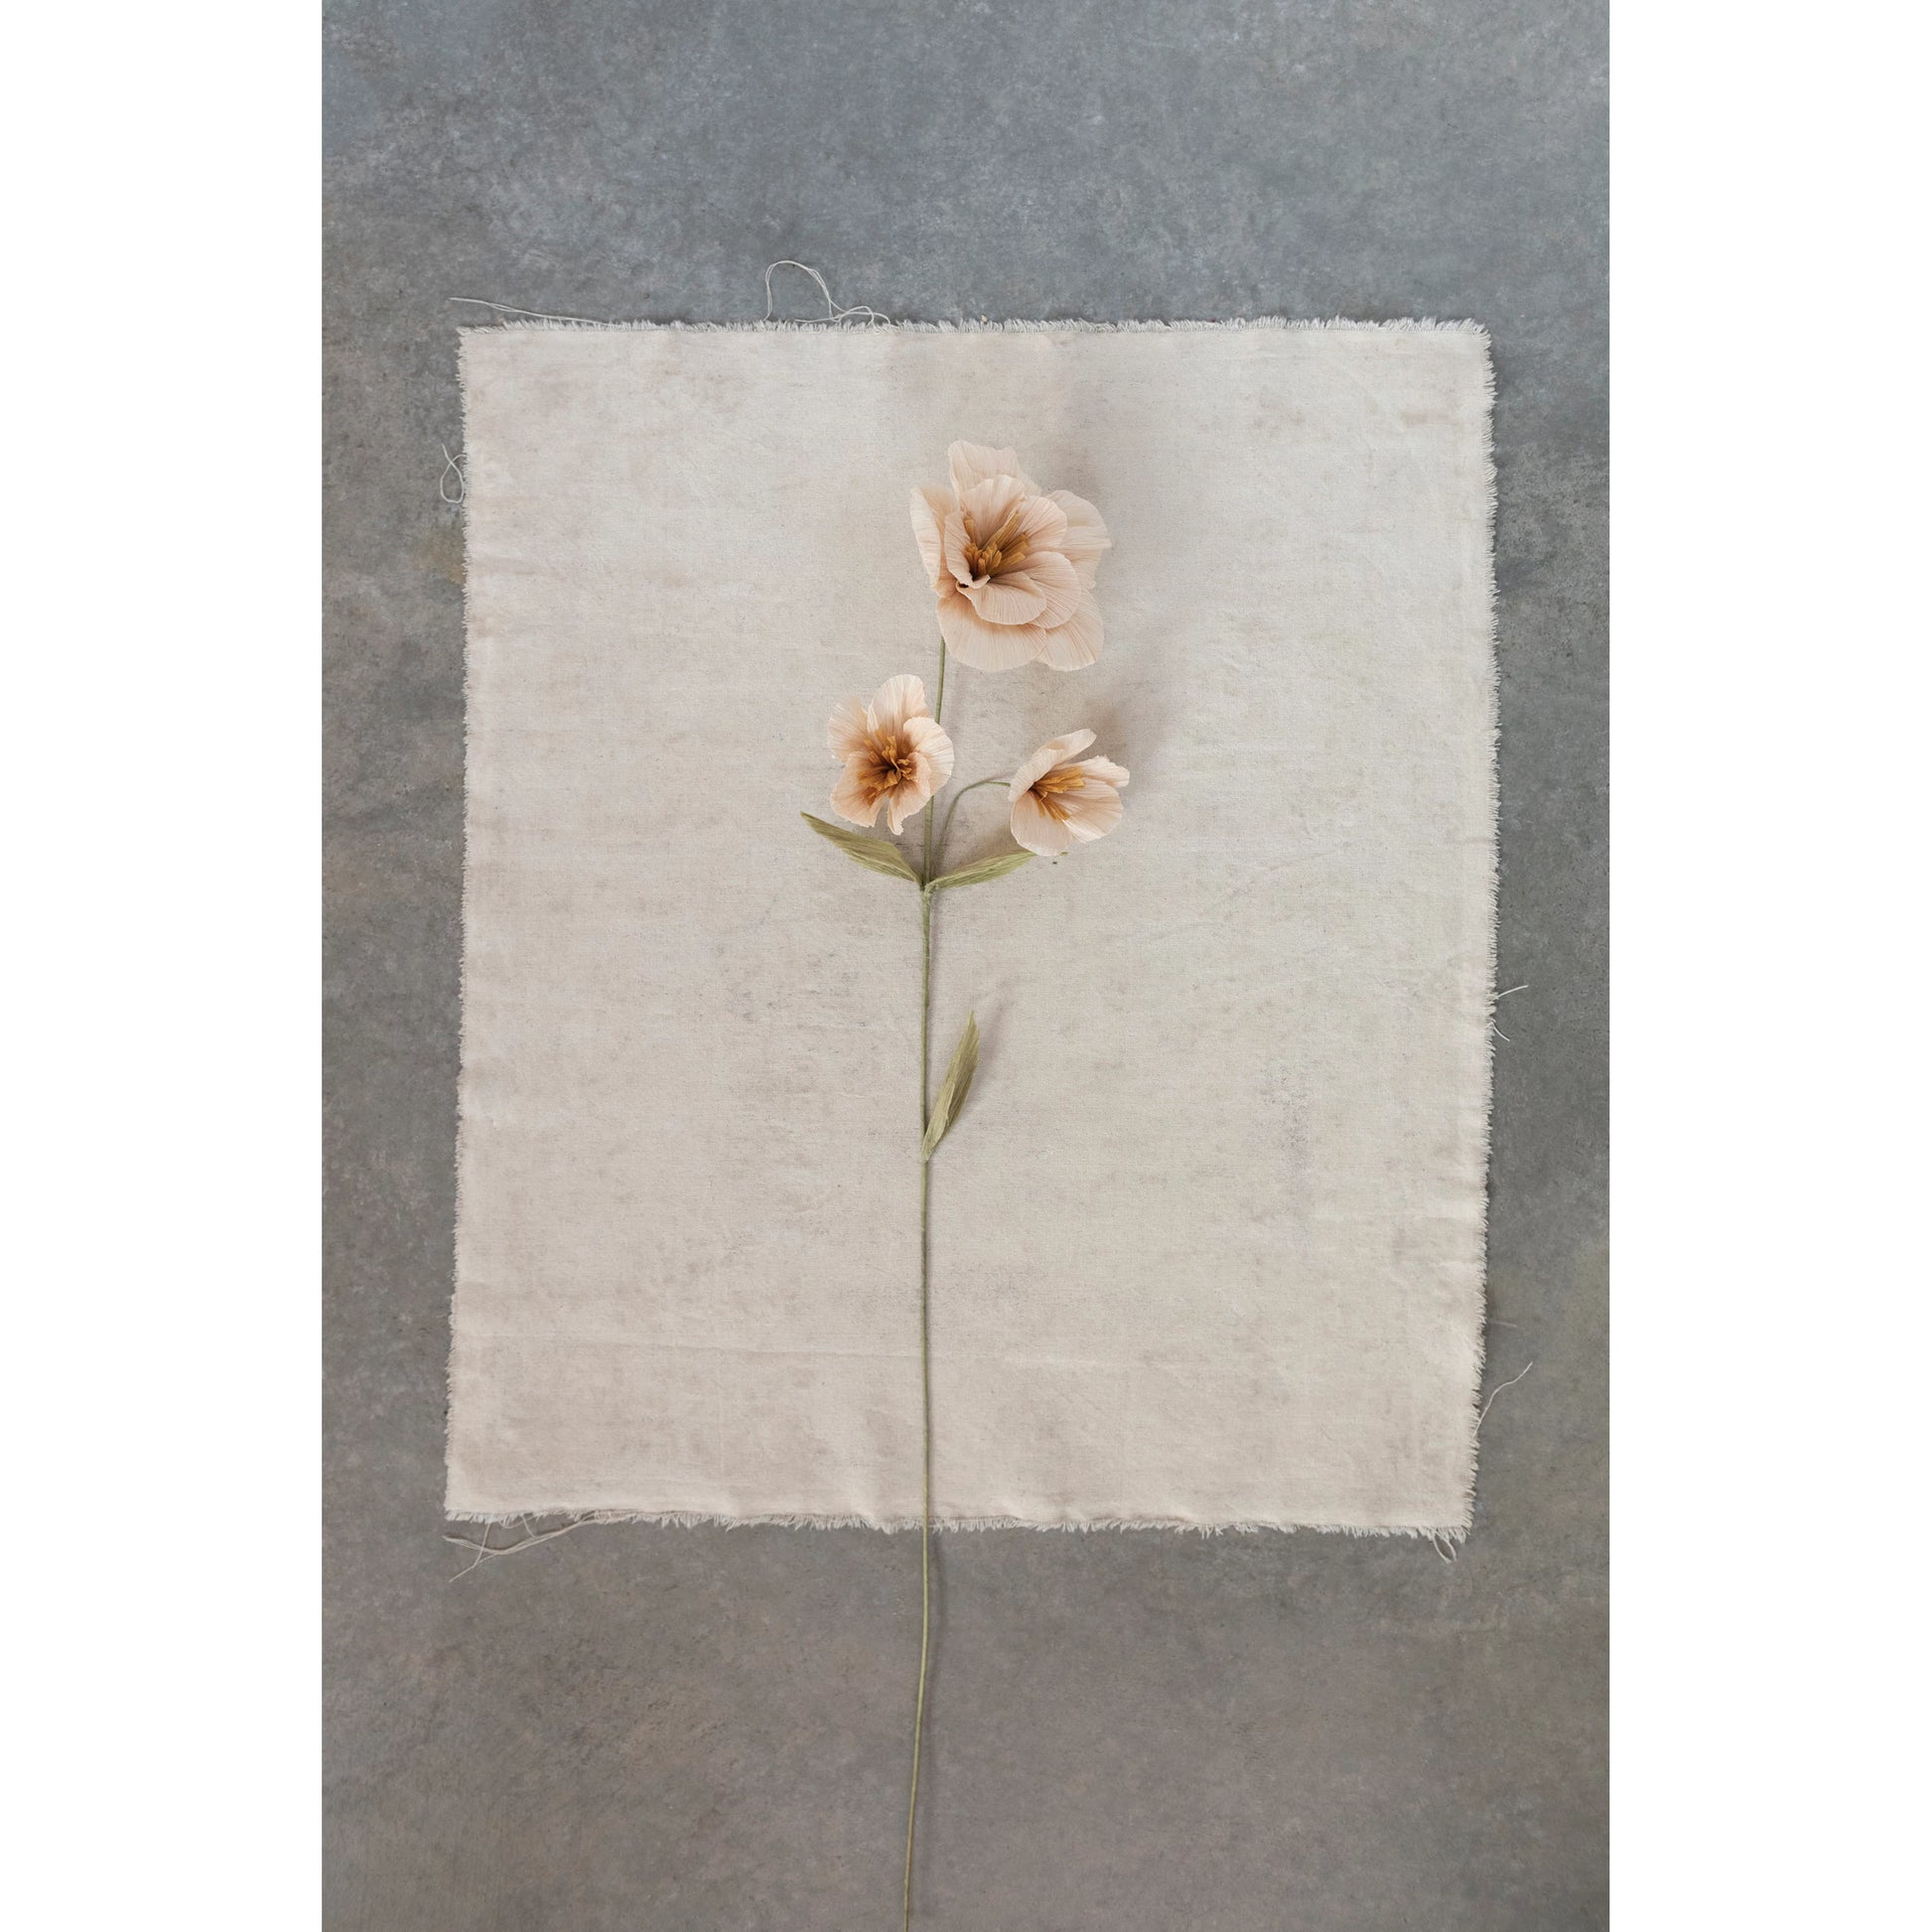 stem with 3 blush flowers laying on a piece of natural linen.